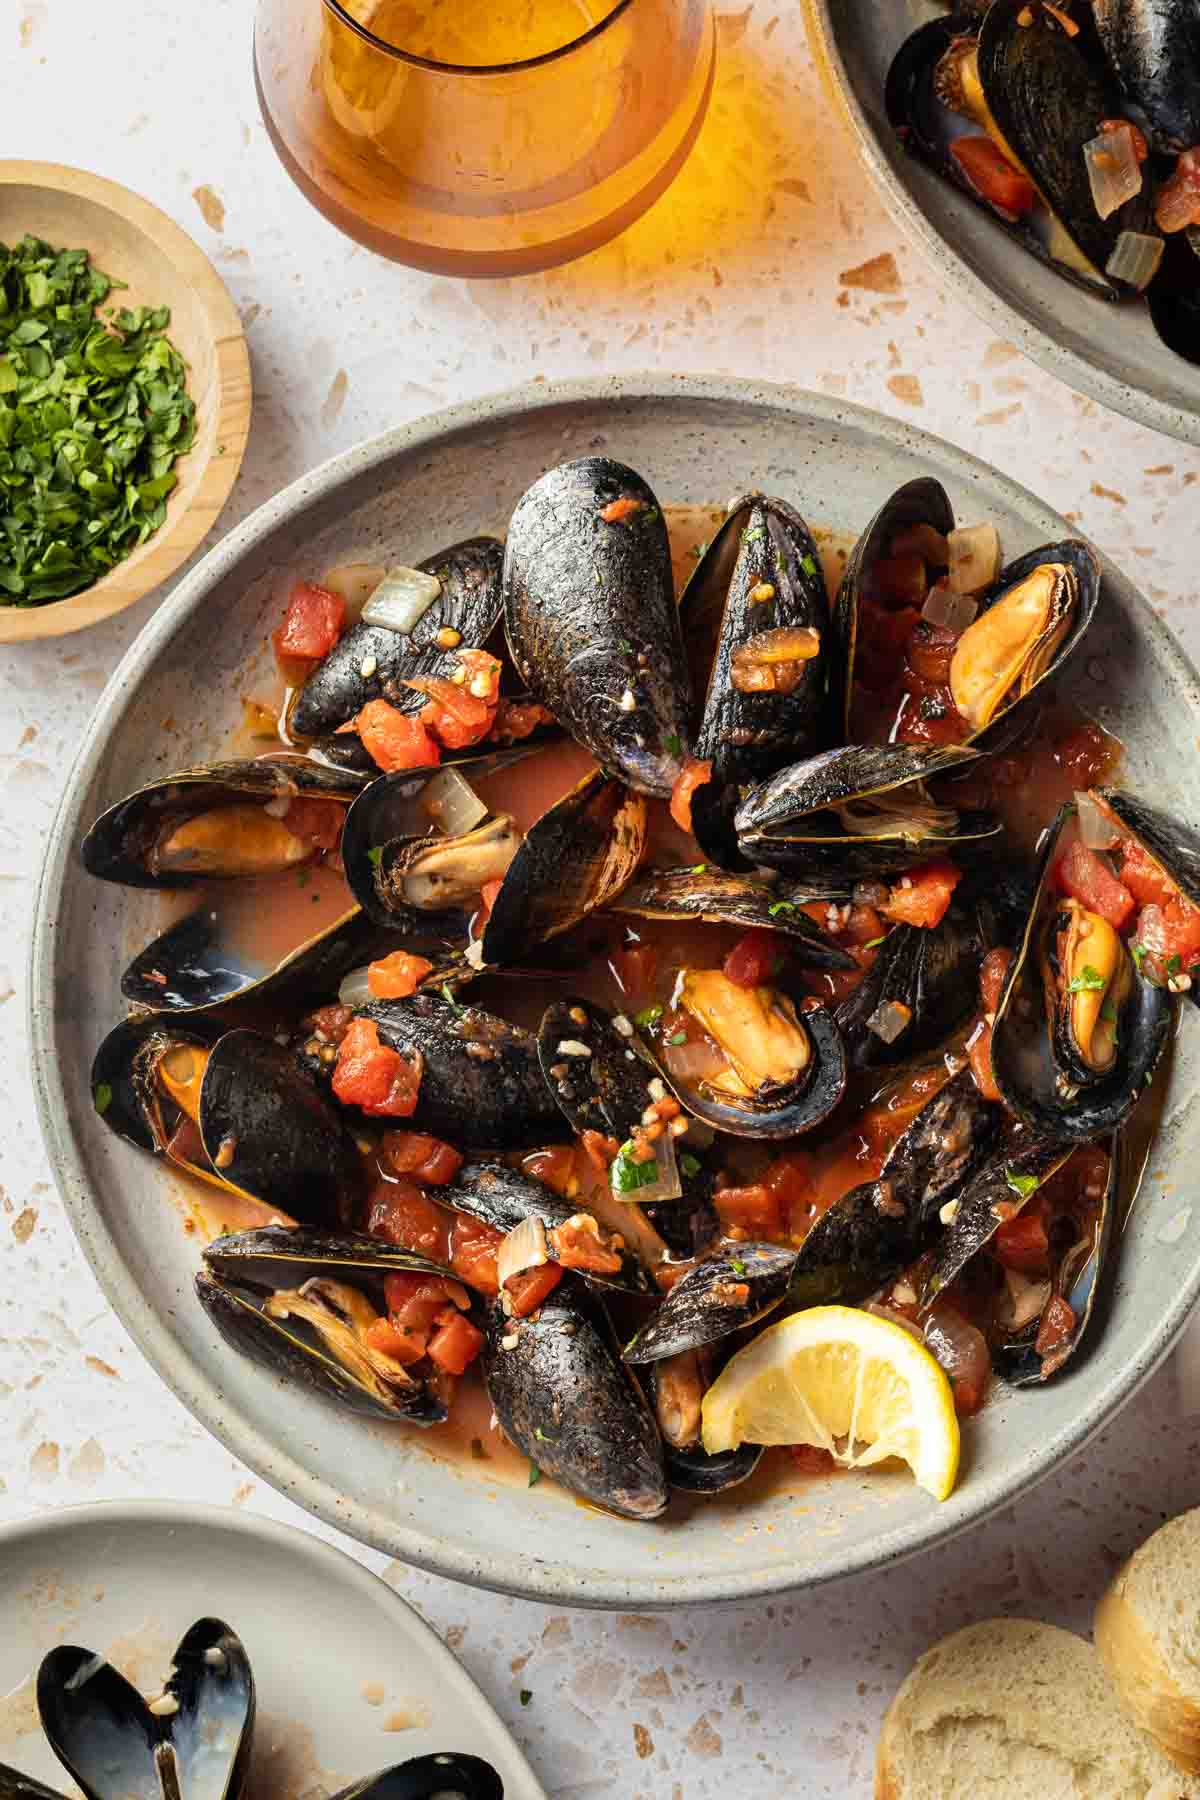 Overhead shot of a bowl of mussels marinara with a lemon wedge, next to some bread slices, and bowl of empty shells and a glass of wine. 